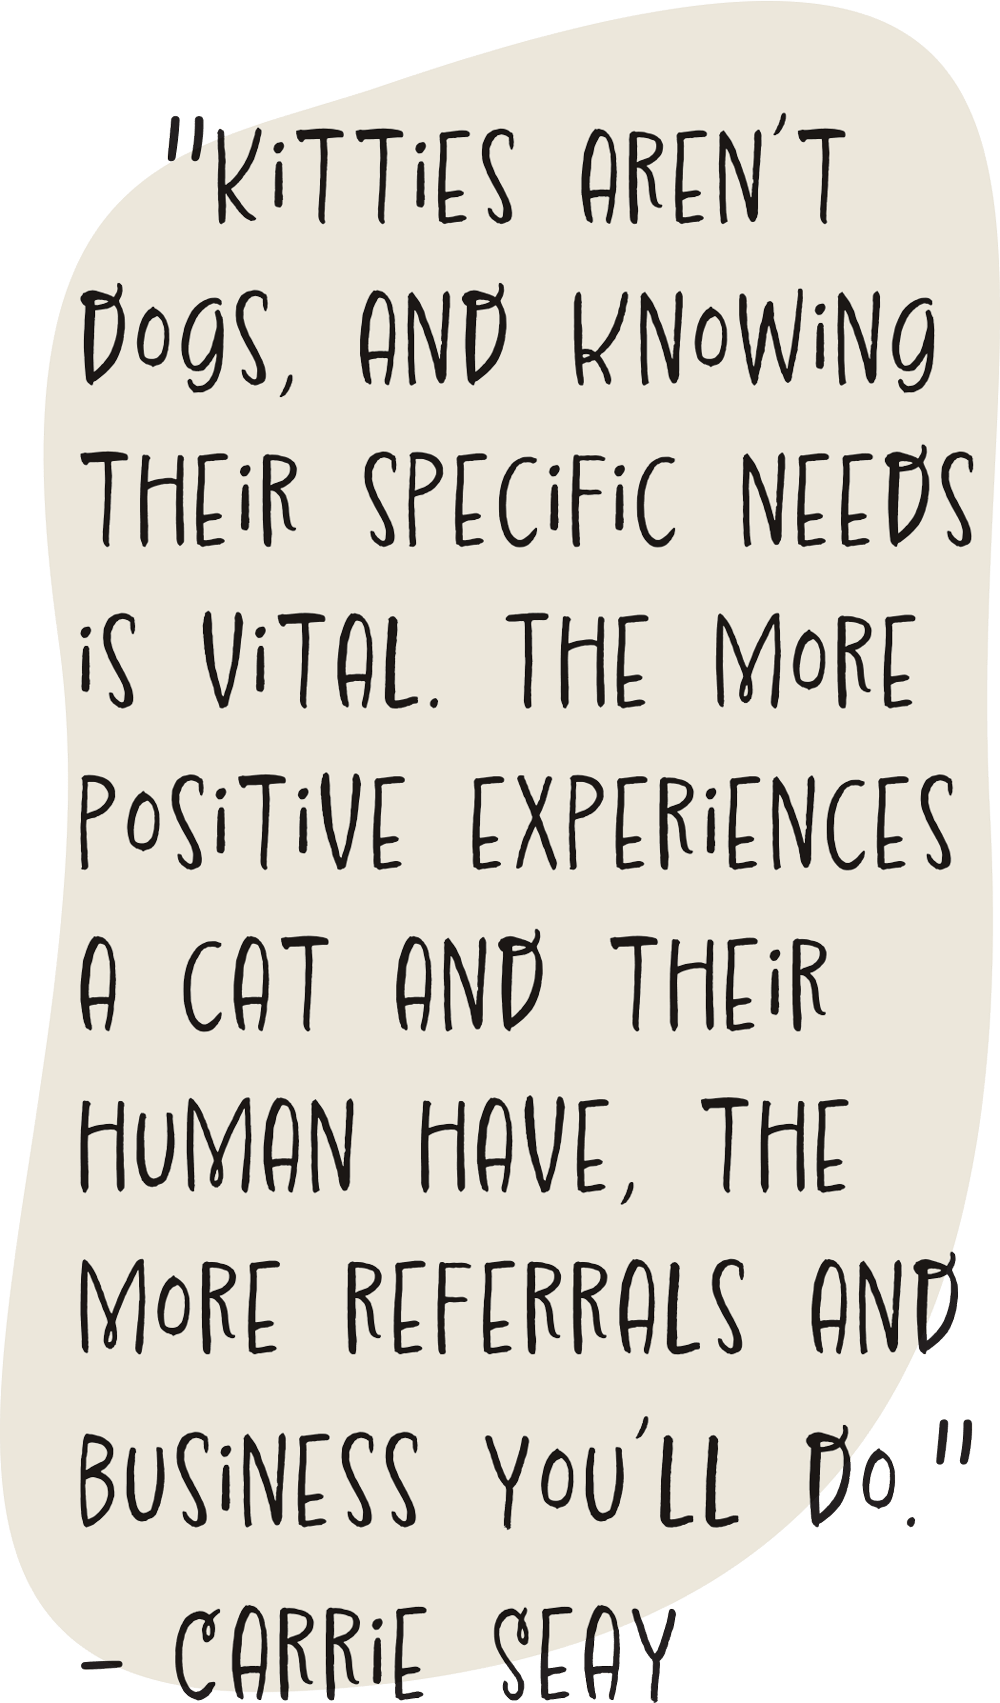 "Kitties aren’t dogs, and knowing their specific needs is vital. The more positive experiences a cat and their human have, the more referrals and business you’ll do." - Carrie Seay